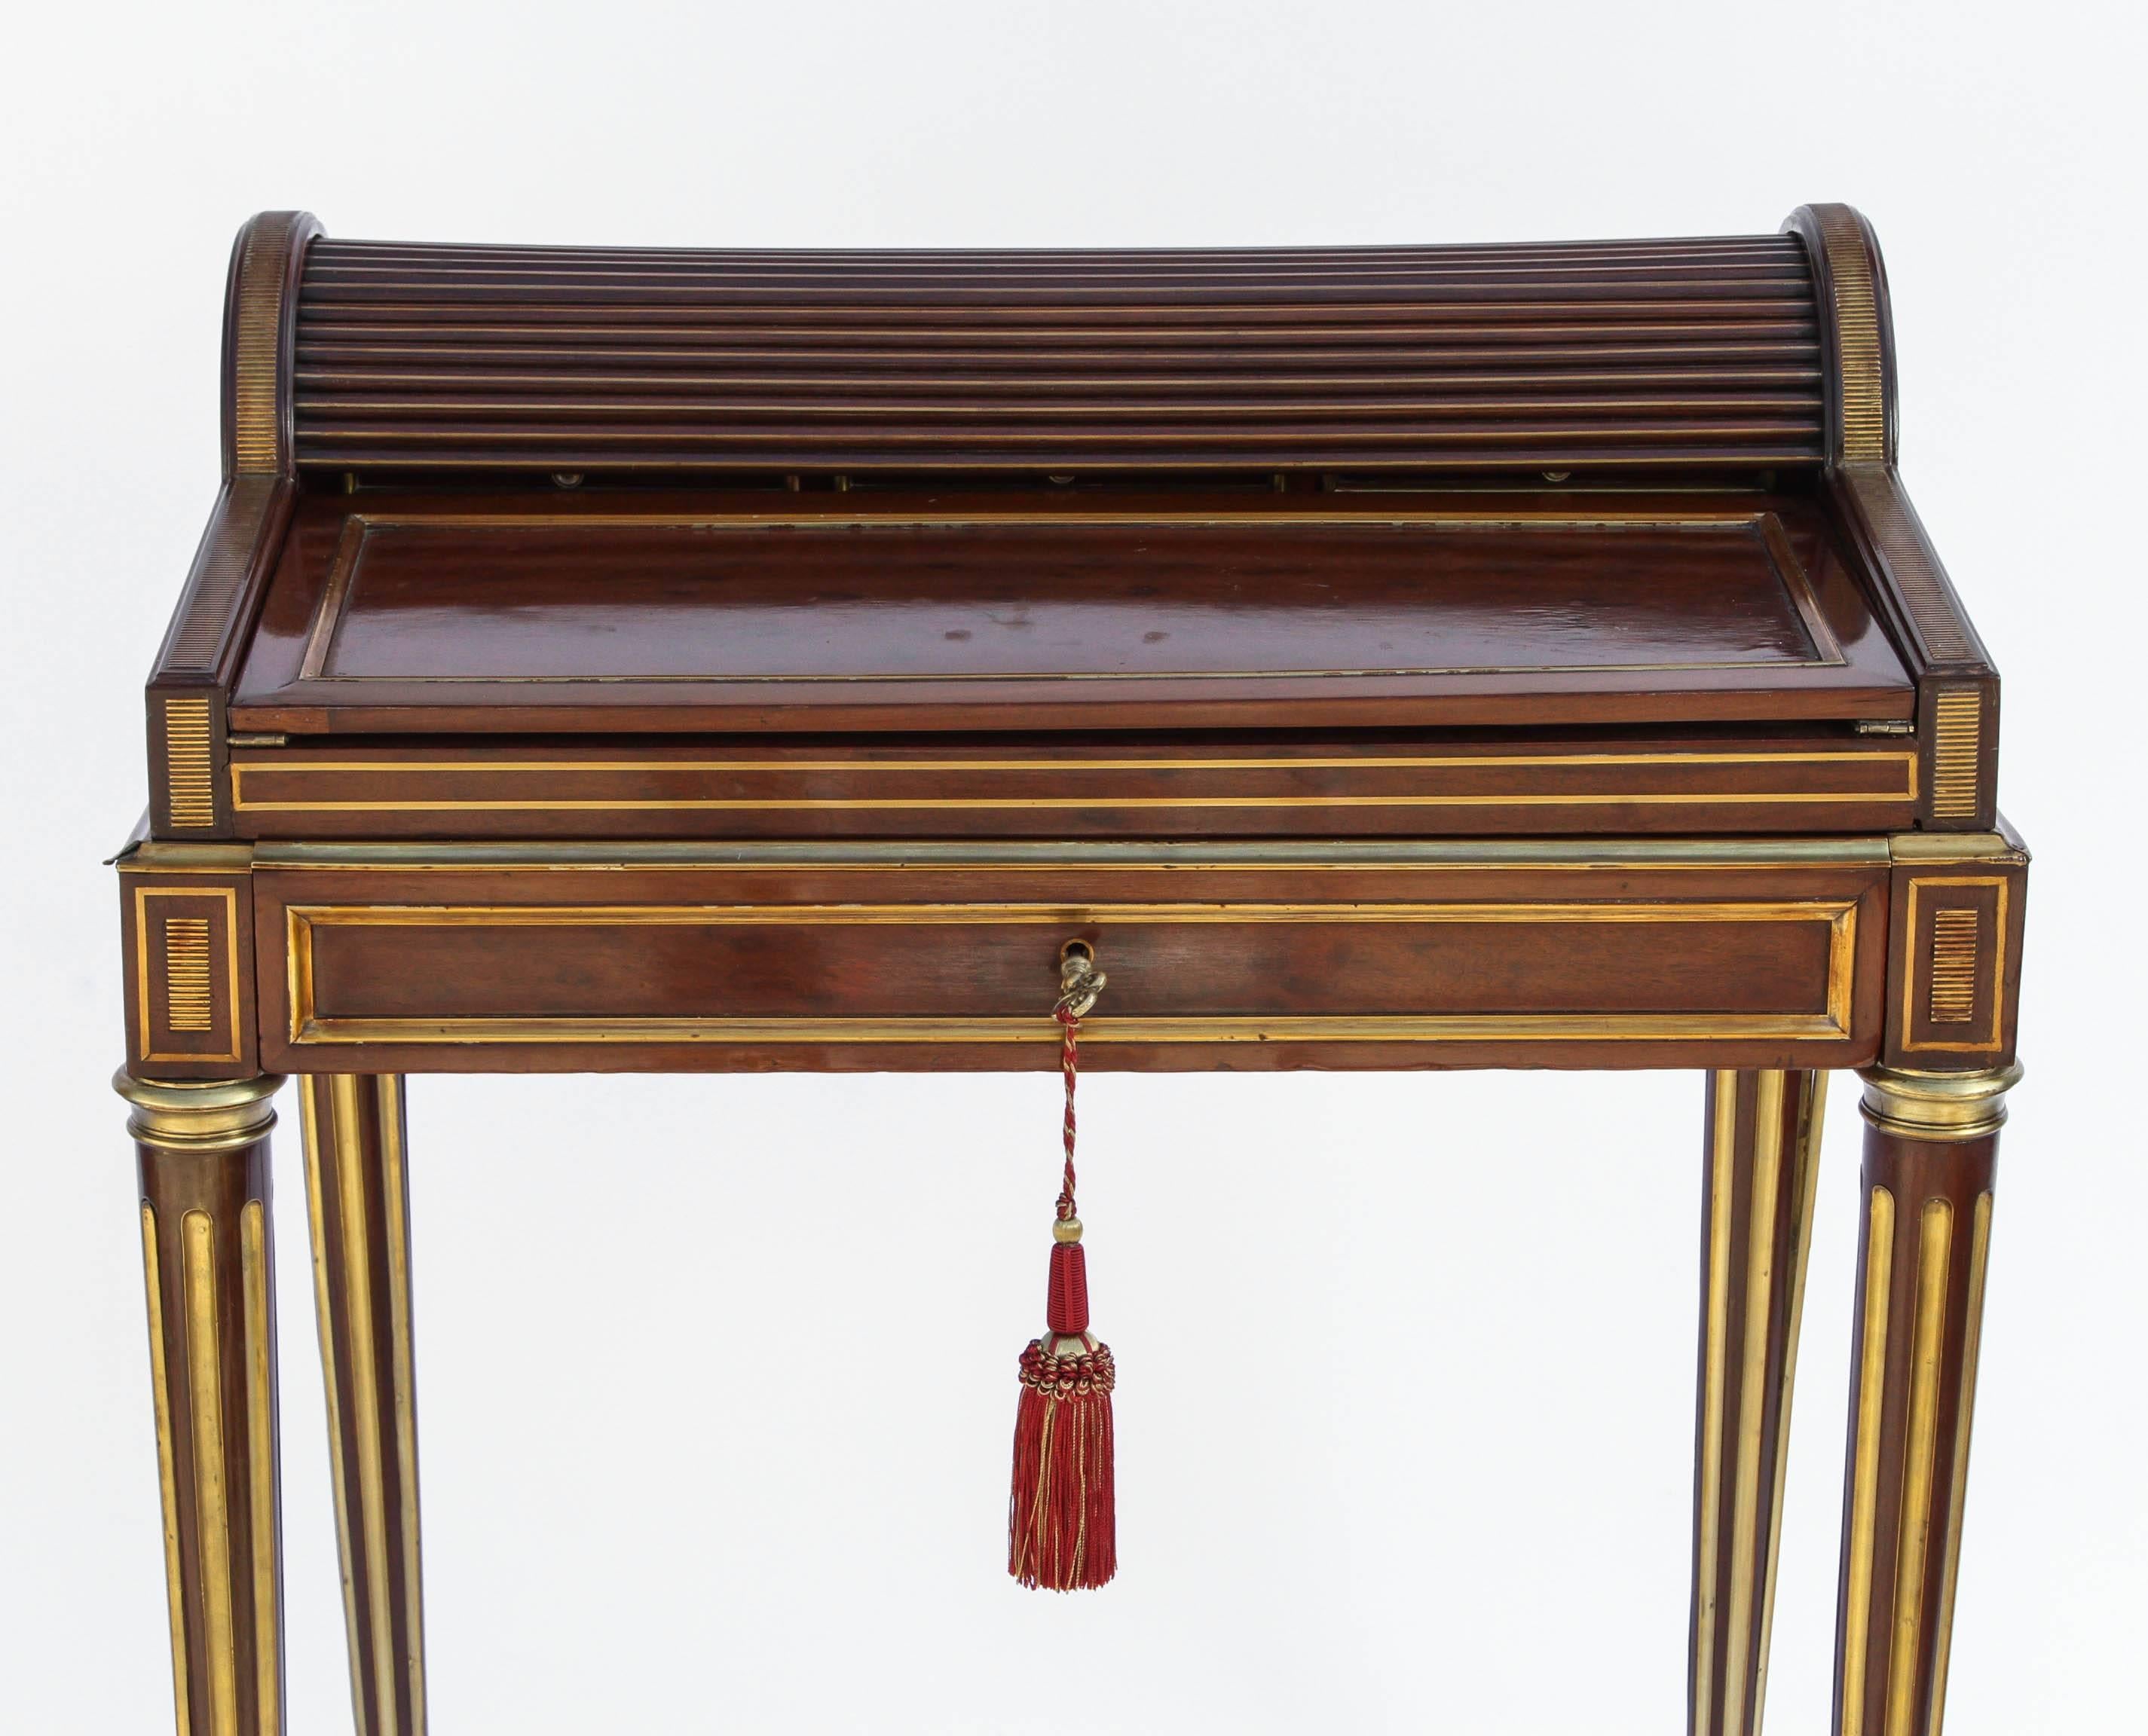 19th century French walnut miniature cylinder writing desk with brass mountings and velvet writing surface. It is signed on the Paul Sorman.